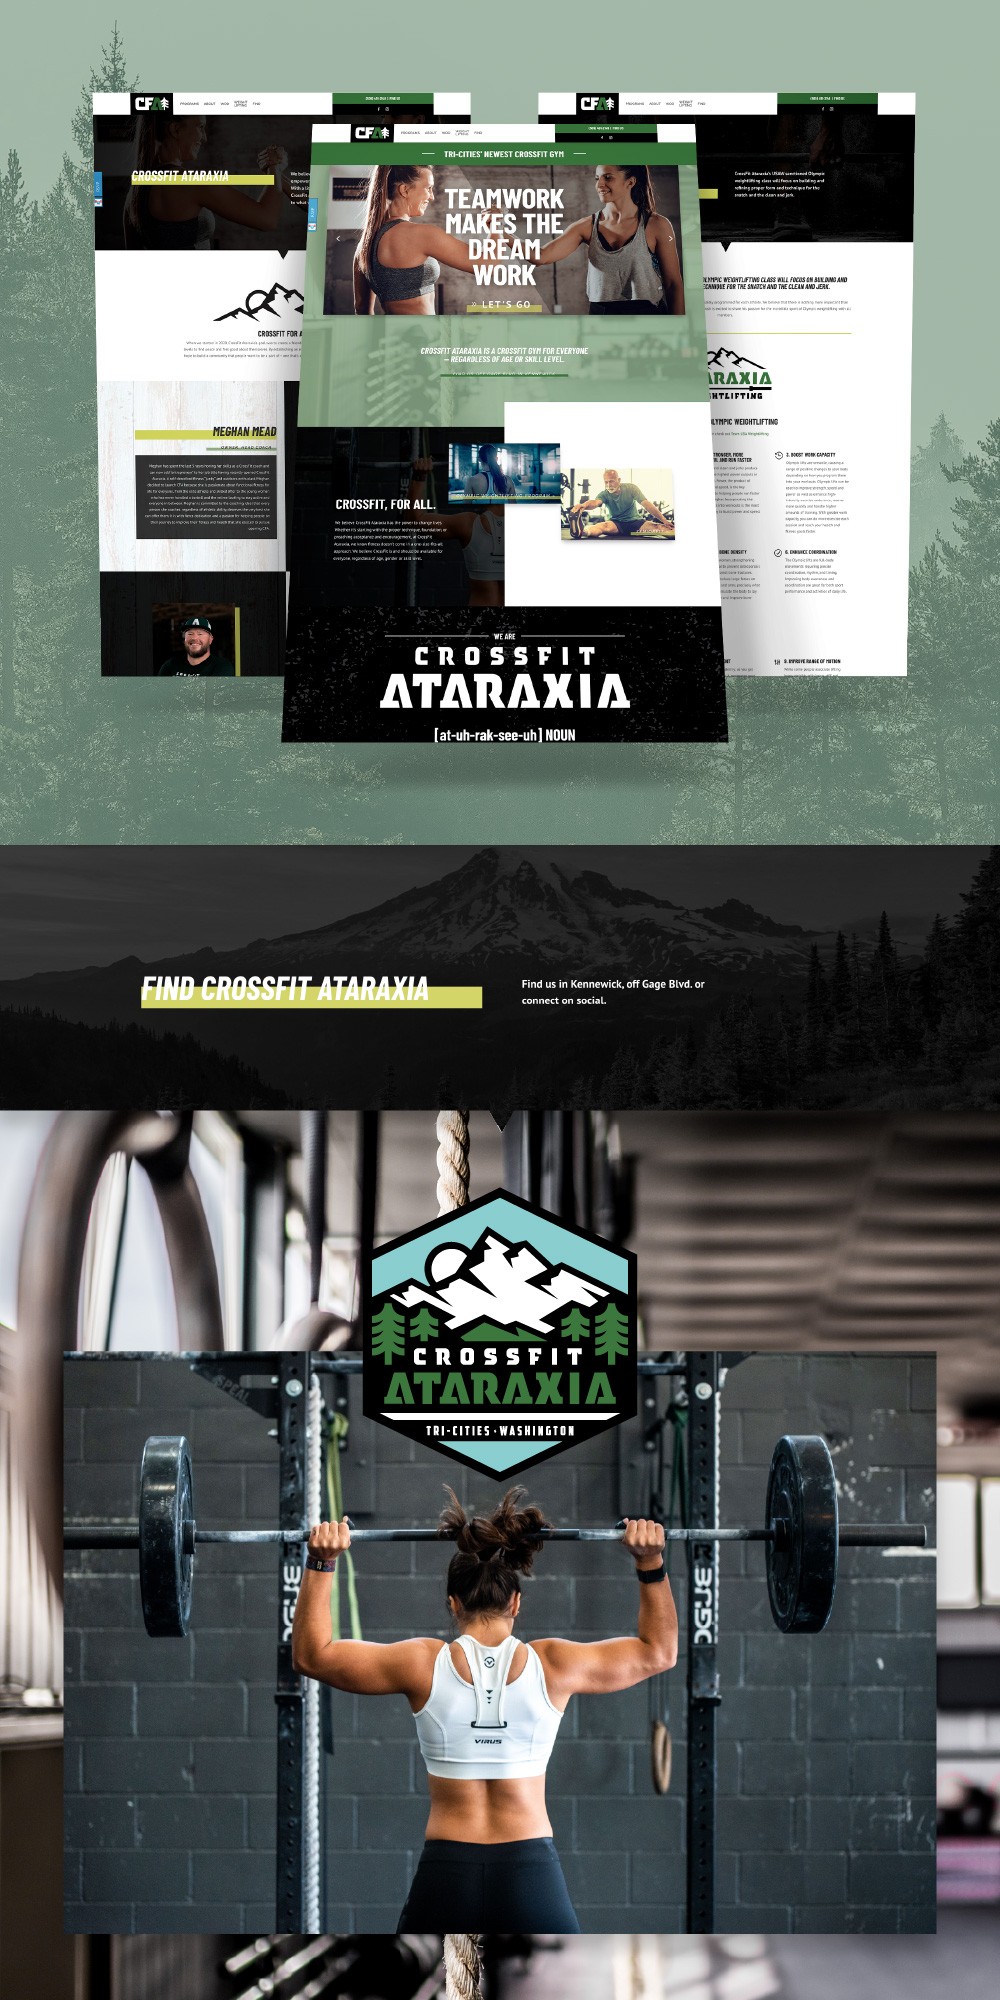 FP work crossfit - Creative Services